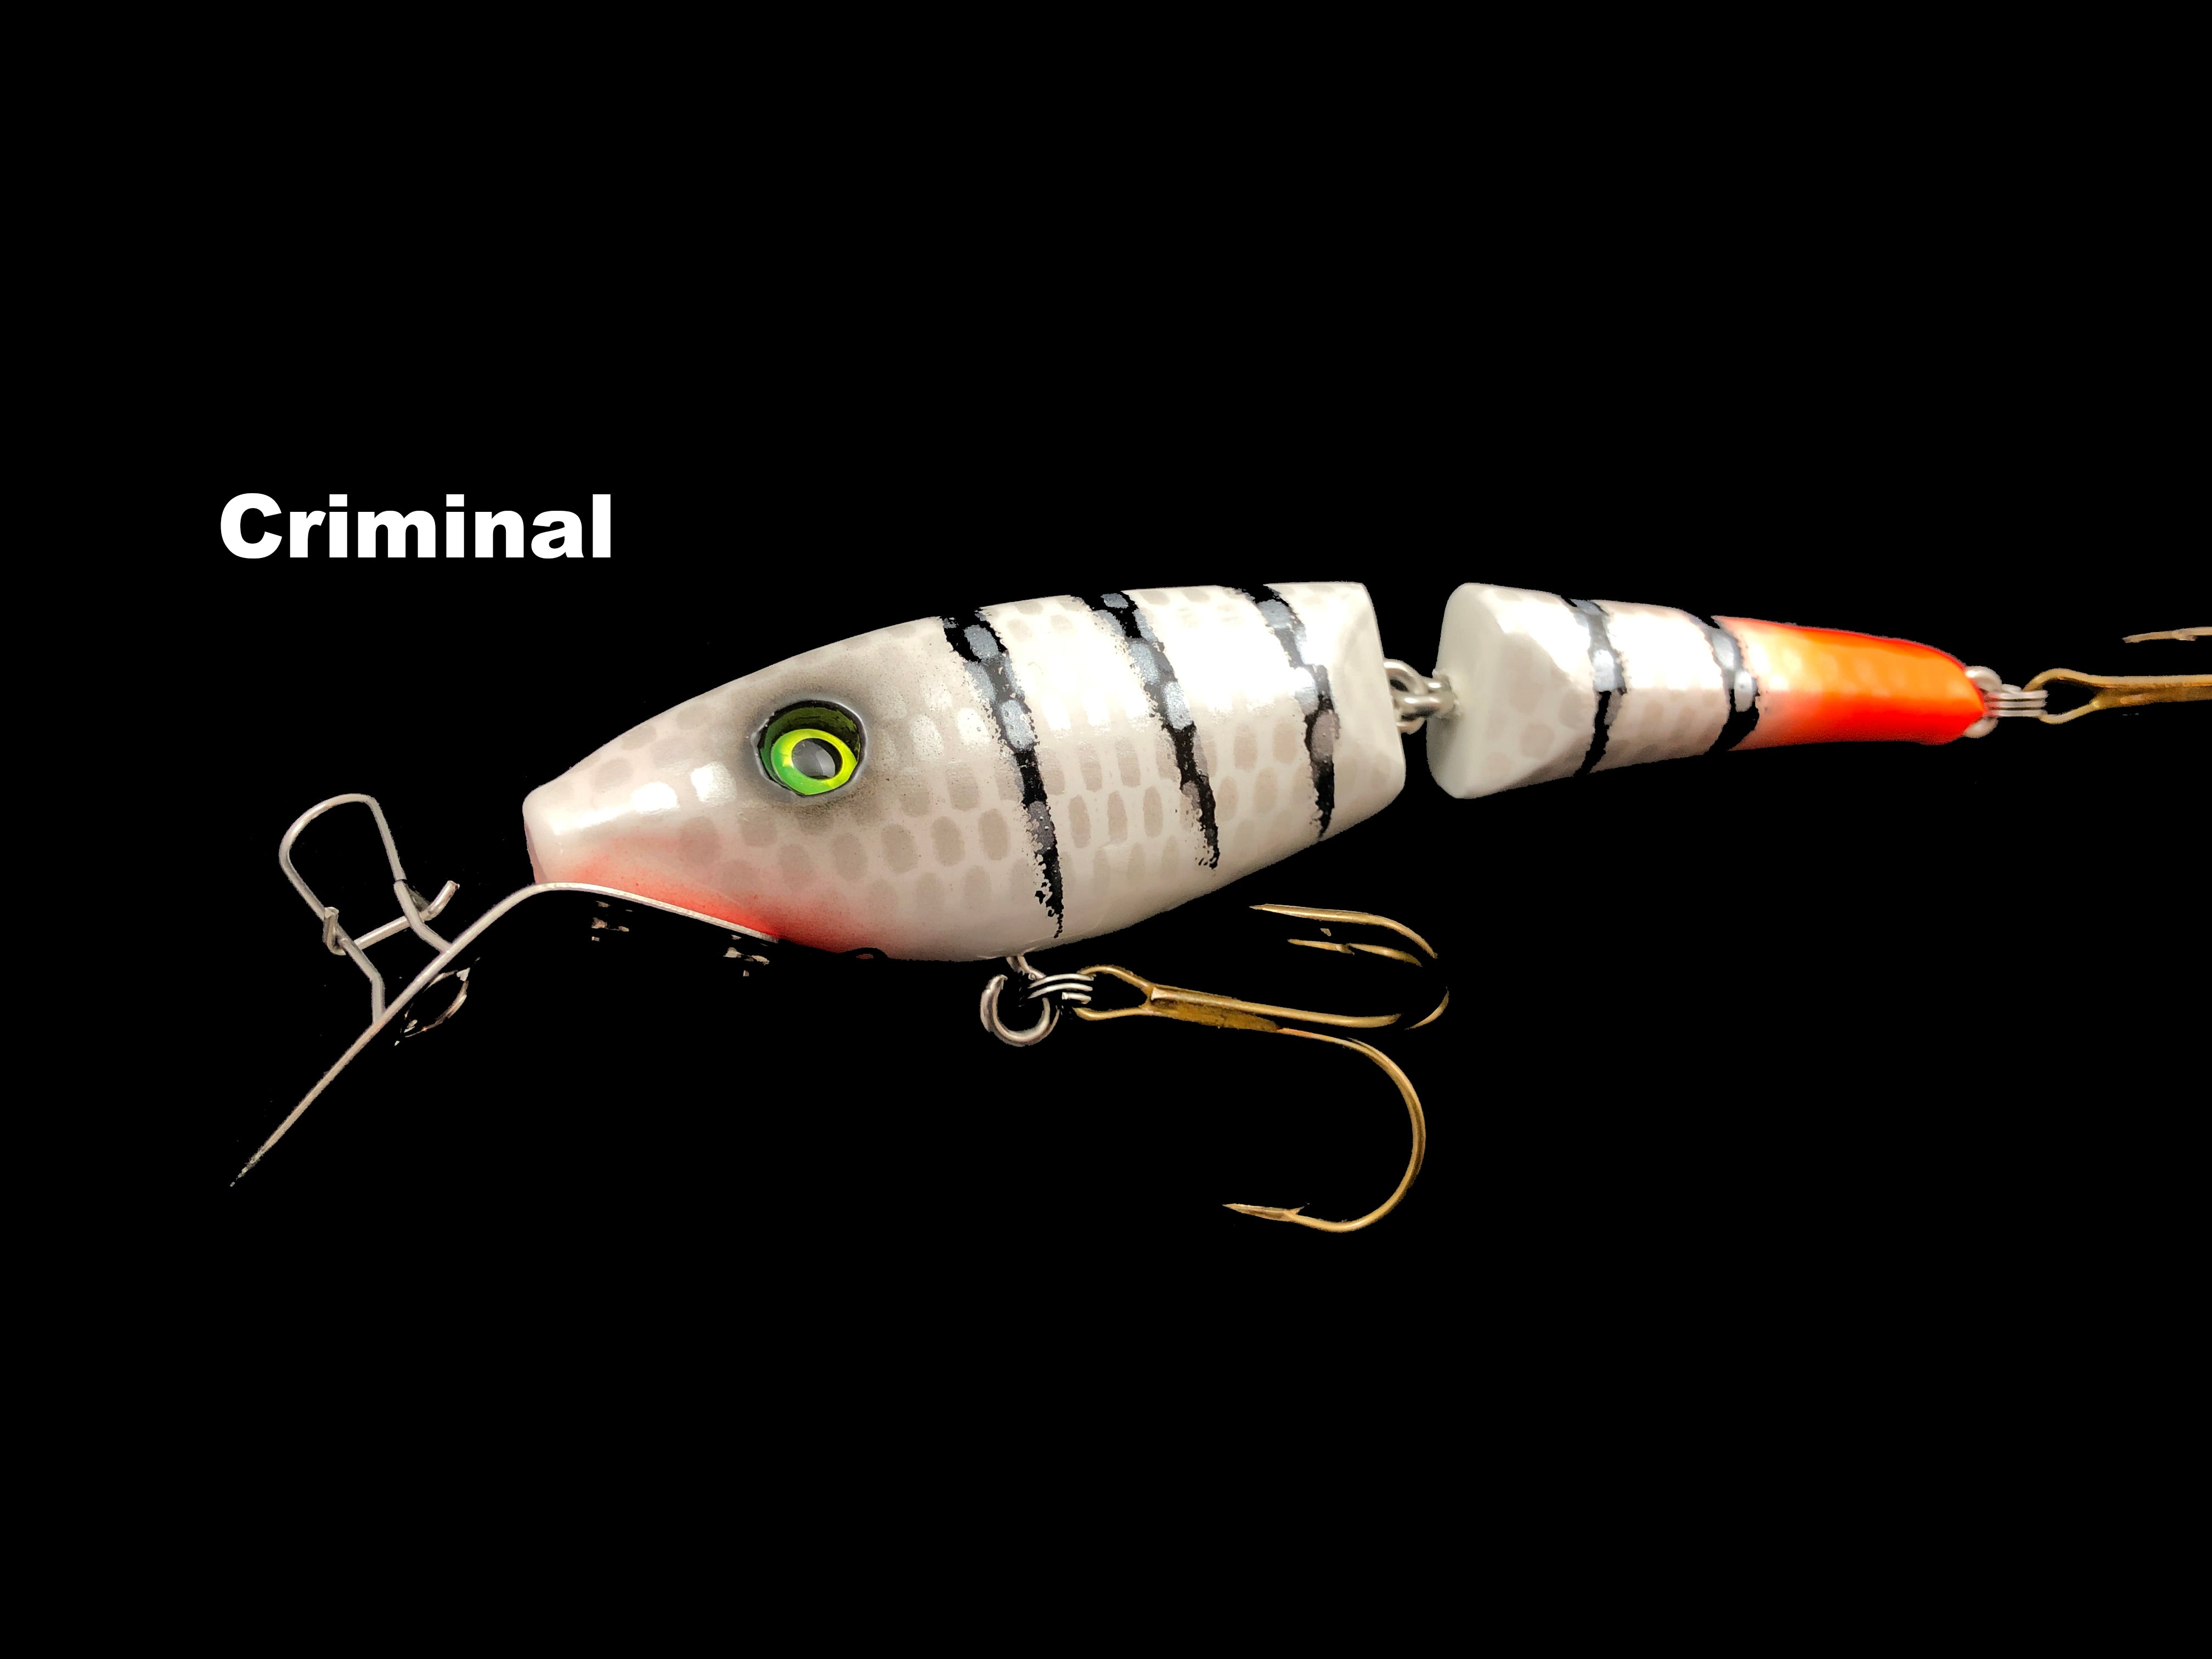 Leo Lure-Shayla Shad-Jointed 5.25 Color Ocean PerchLEO LURES-SHAYLA SHAD  JOINTED5 1/4 inches lengthThe Shayla SHAD has a lifelike fish-shaped body.  Great for casting or trolling. This shallow running lure will be ideal